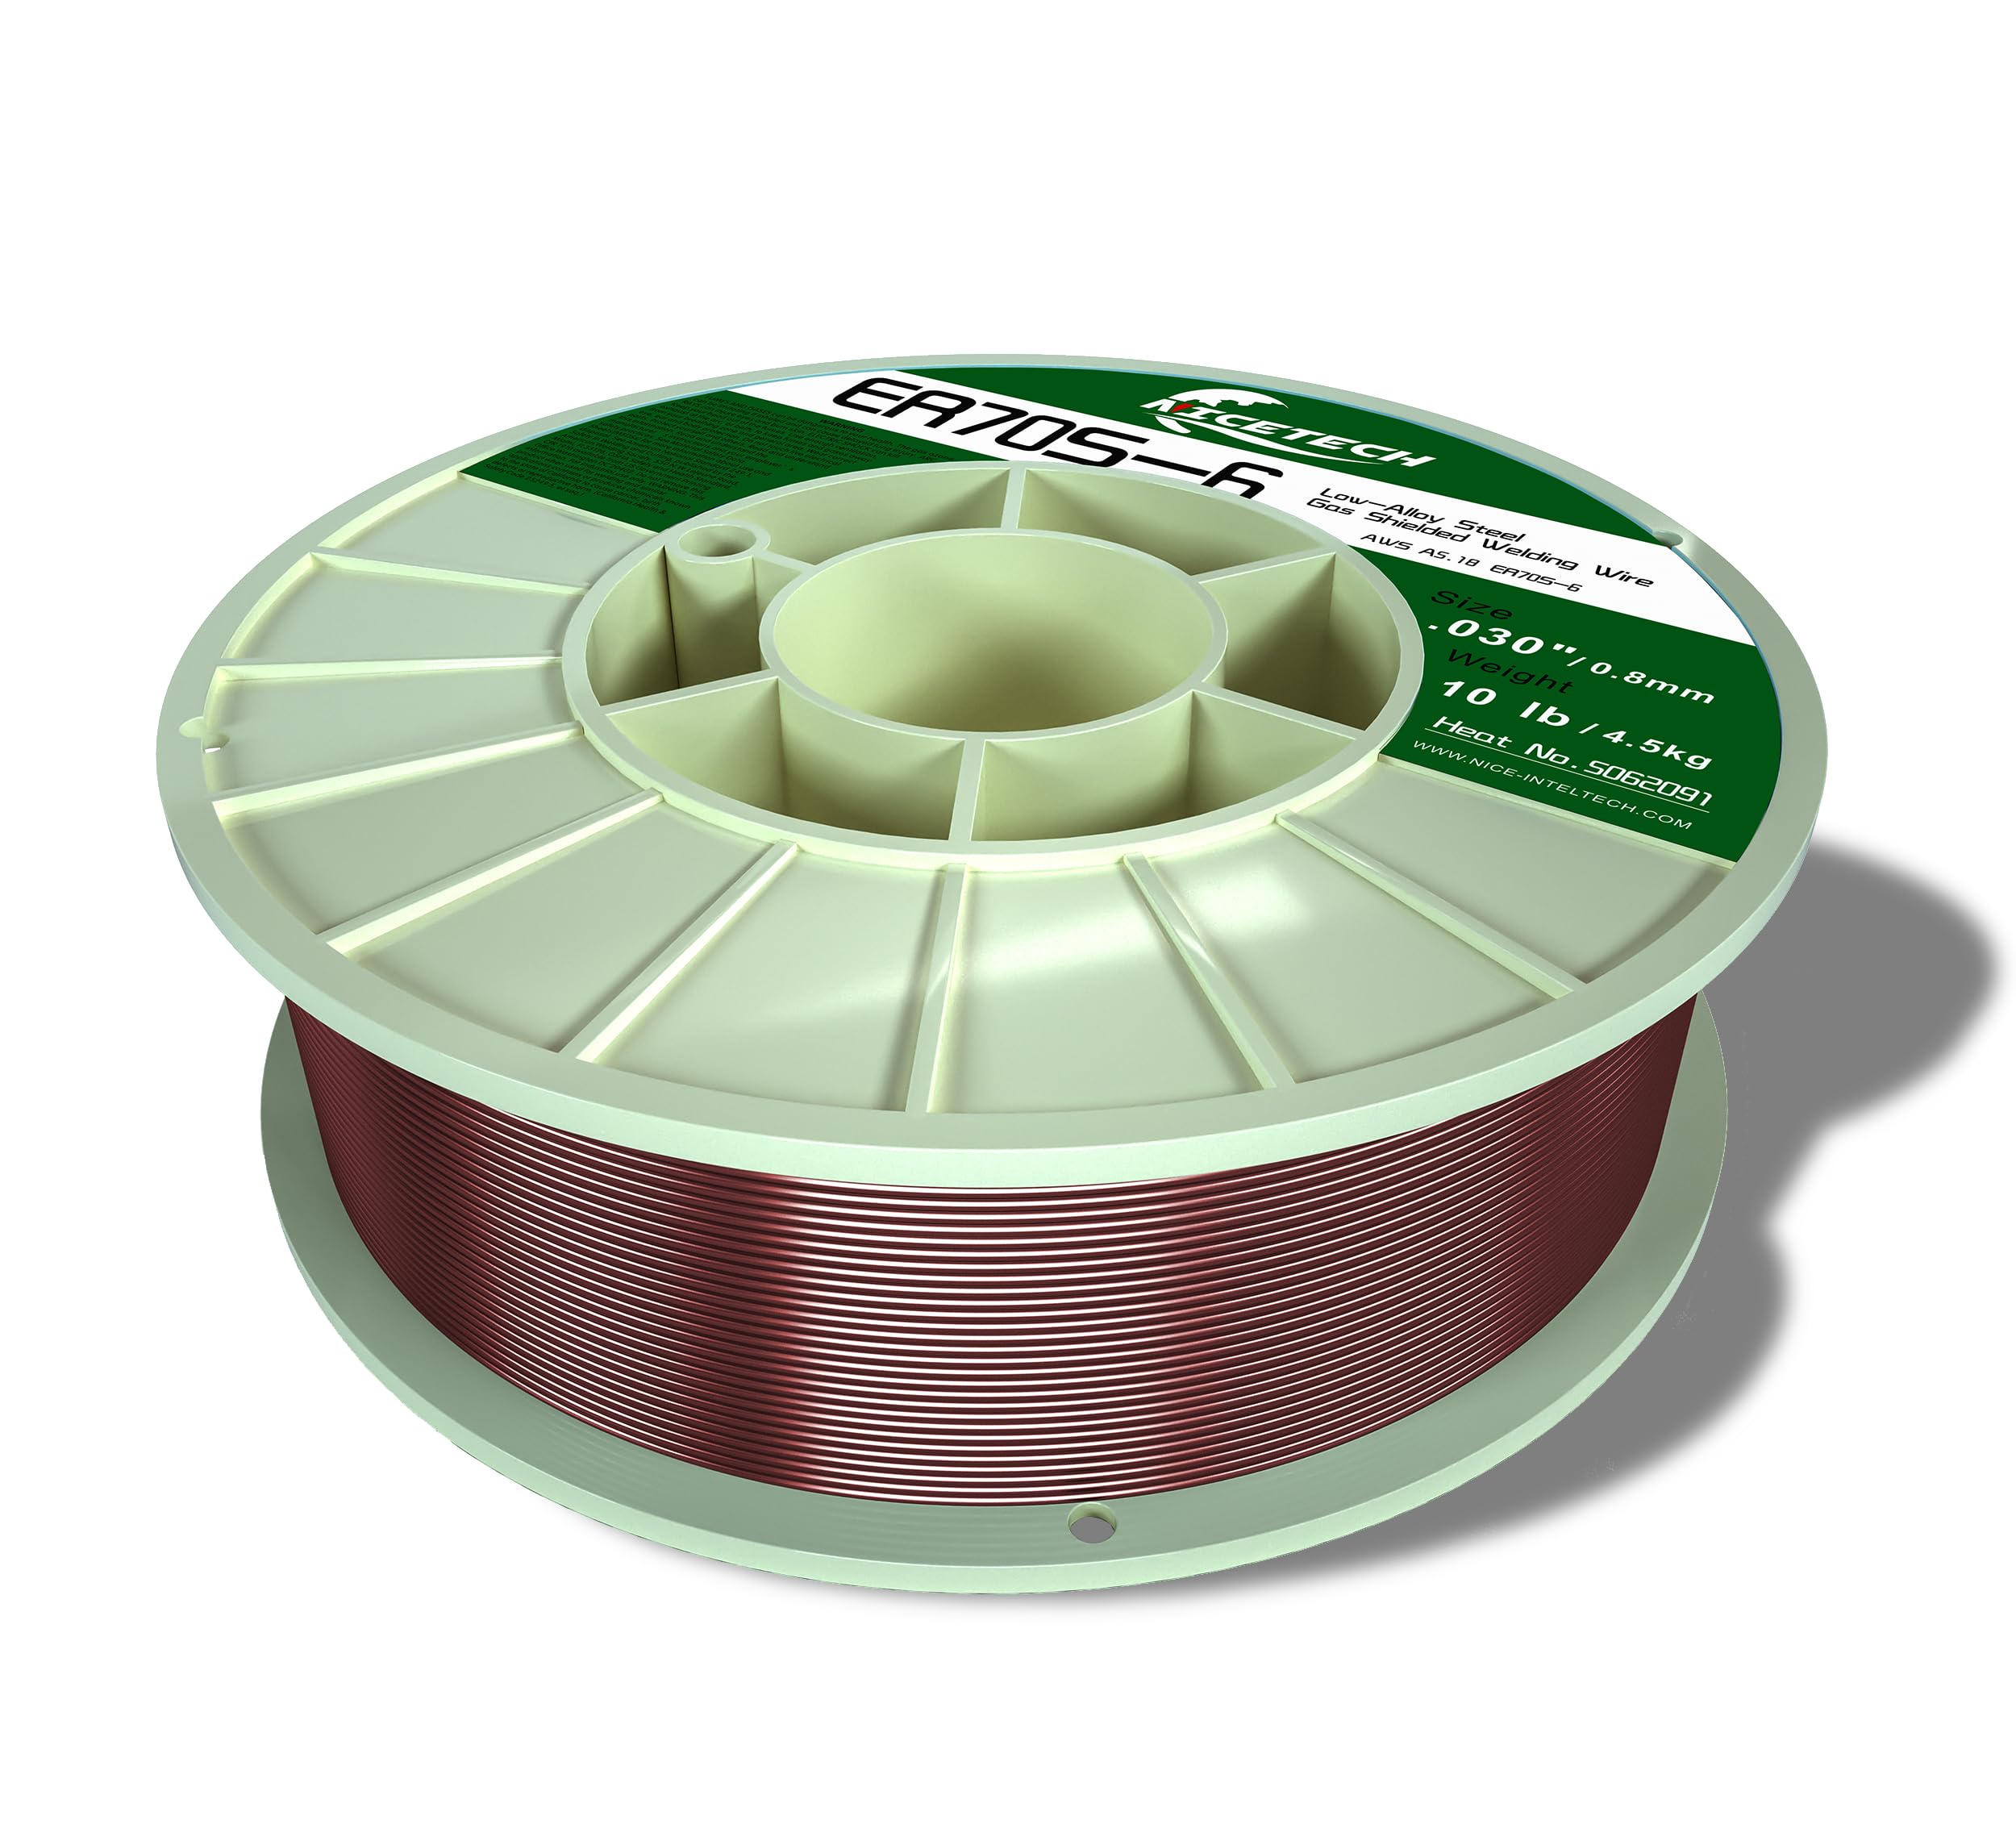 NICETECH, MIG Solid Welding Wire, Carbon Steel, ER70S-6 .030-Diameter, 10 Pounds Spool, Package of 1